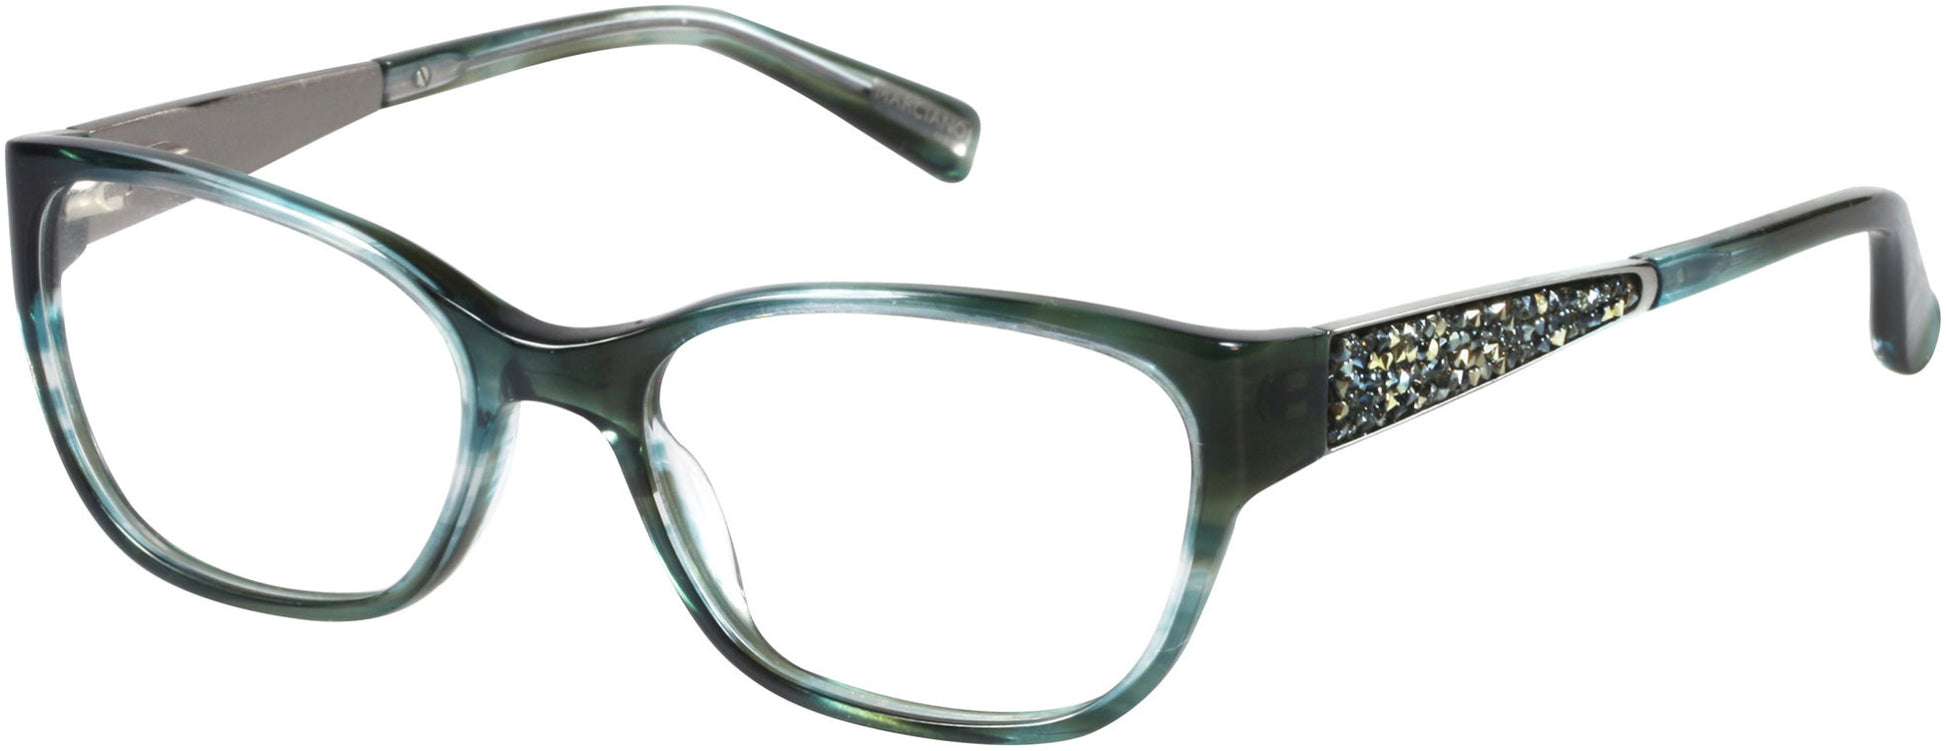 Guess By Marciano GM0243 Square Eyeglasses I33-I33 - Green